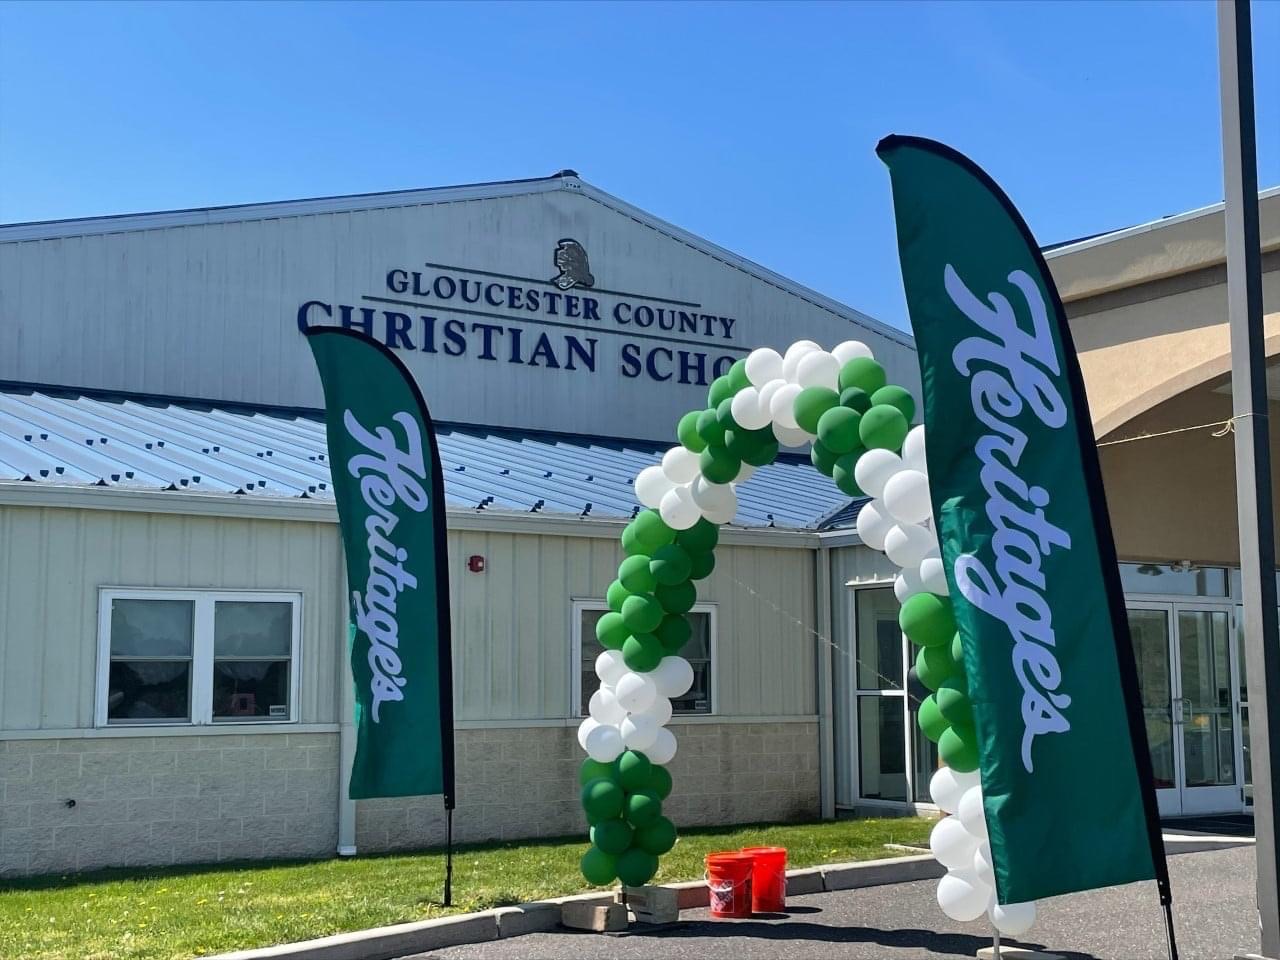 Heritage’s Sponsors Walk-a-Thon at Gloucester County Christian School